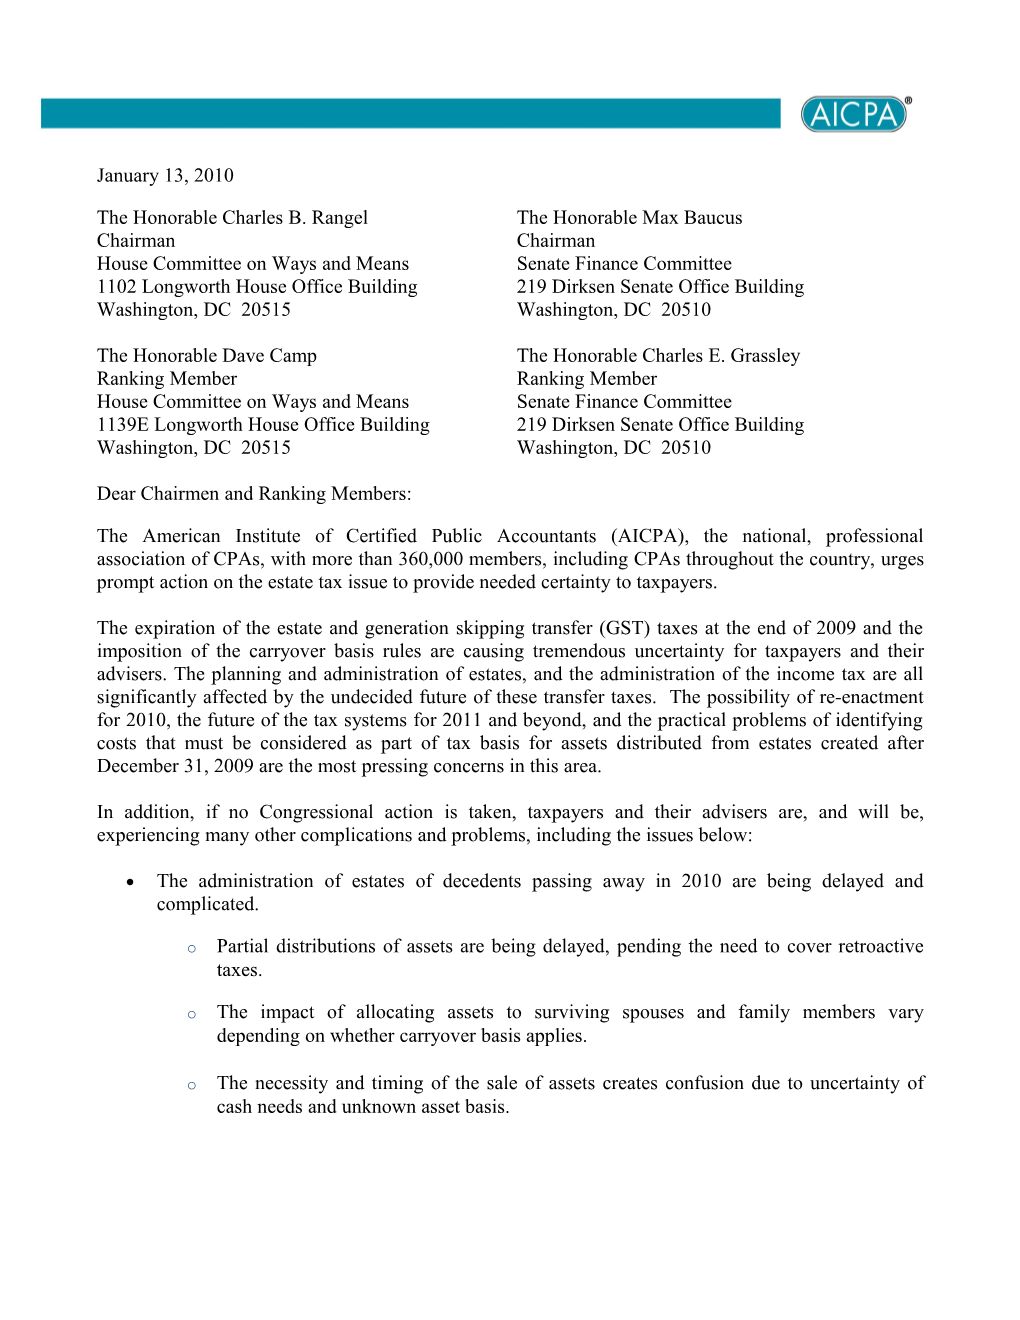 AICPA Letter to Congress on Urgency for Estate Tax Legislation and Reform Priorities